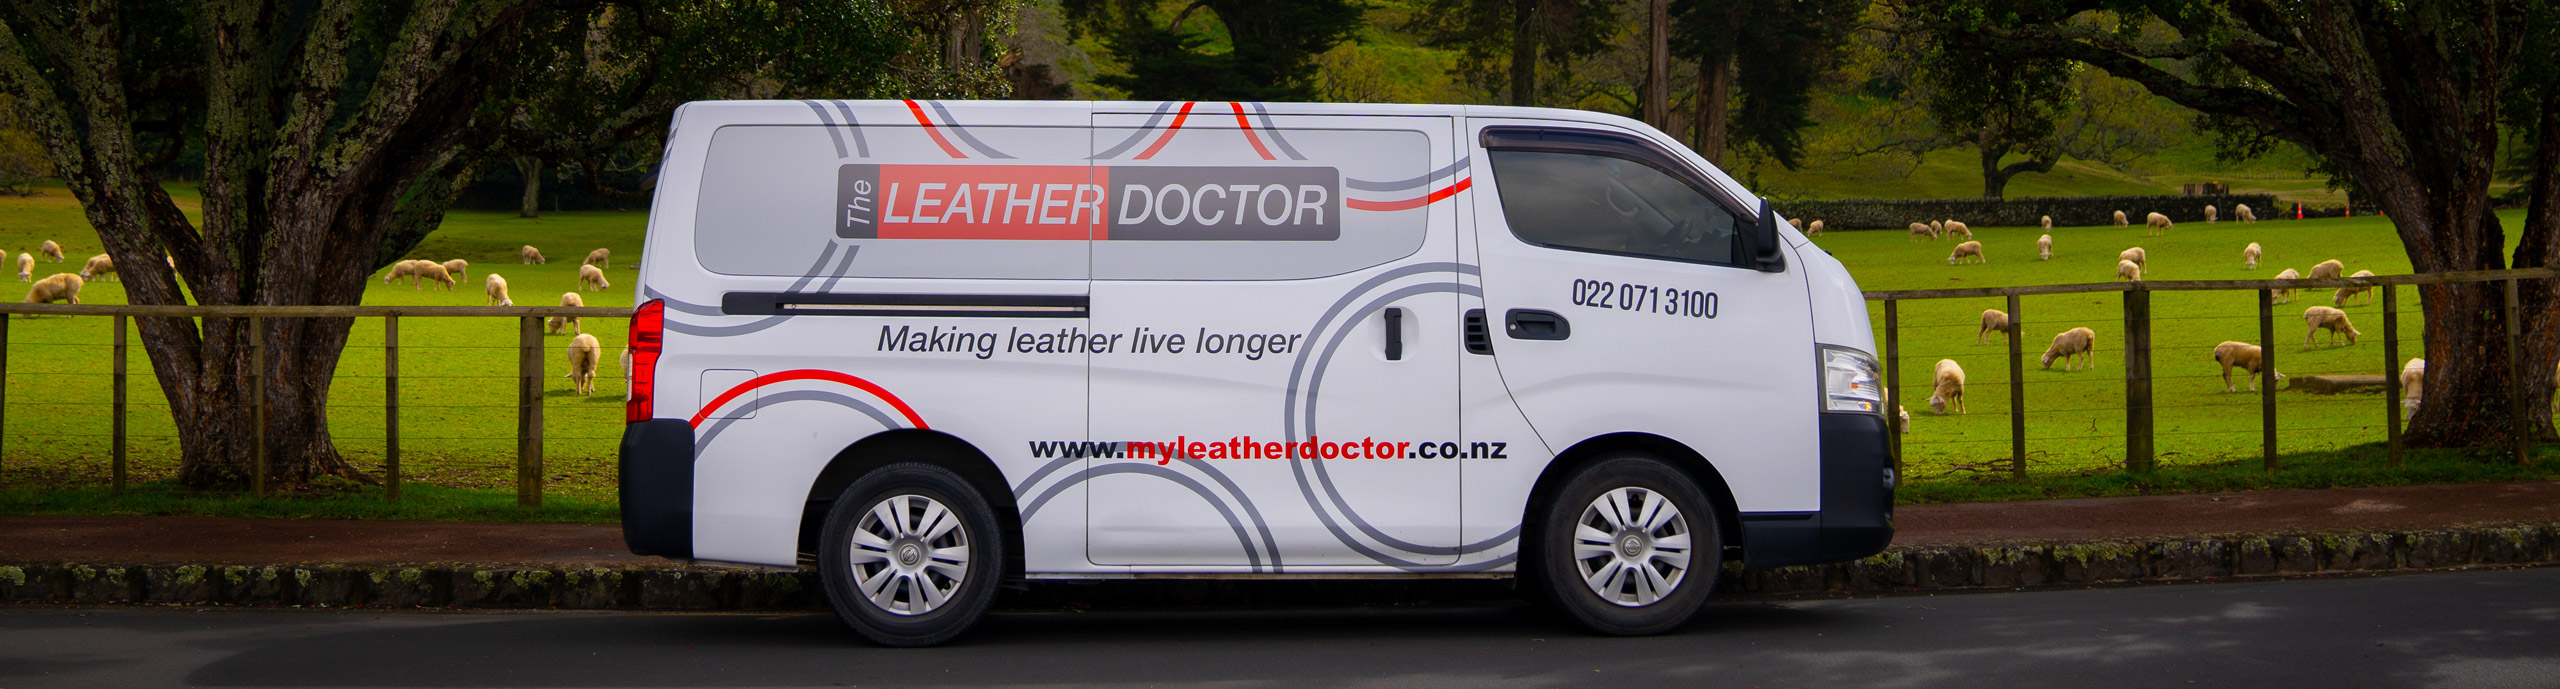 About Leather Doctor New Zealand